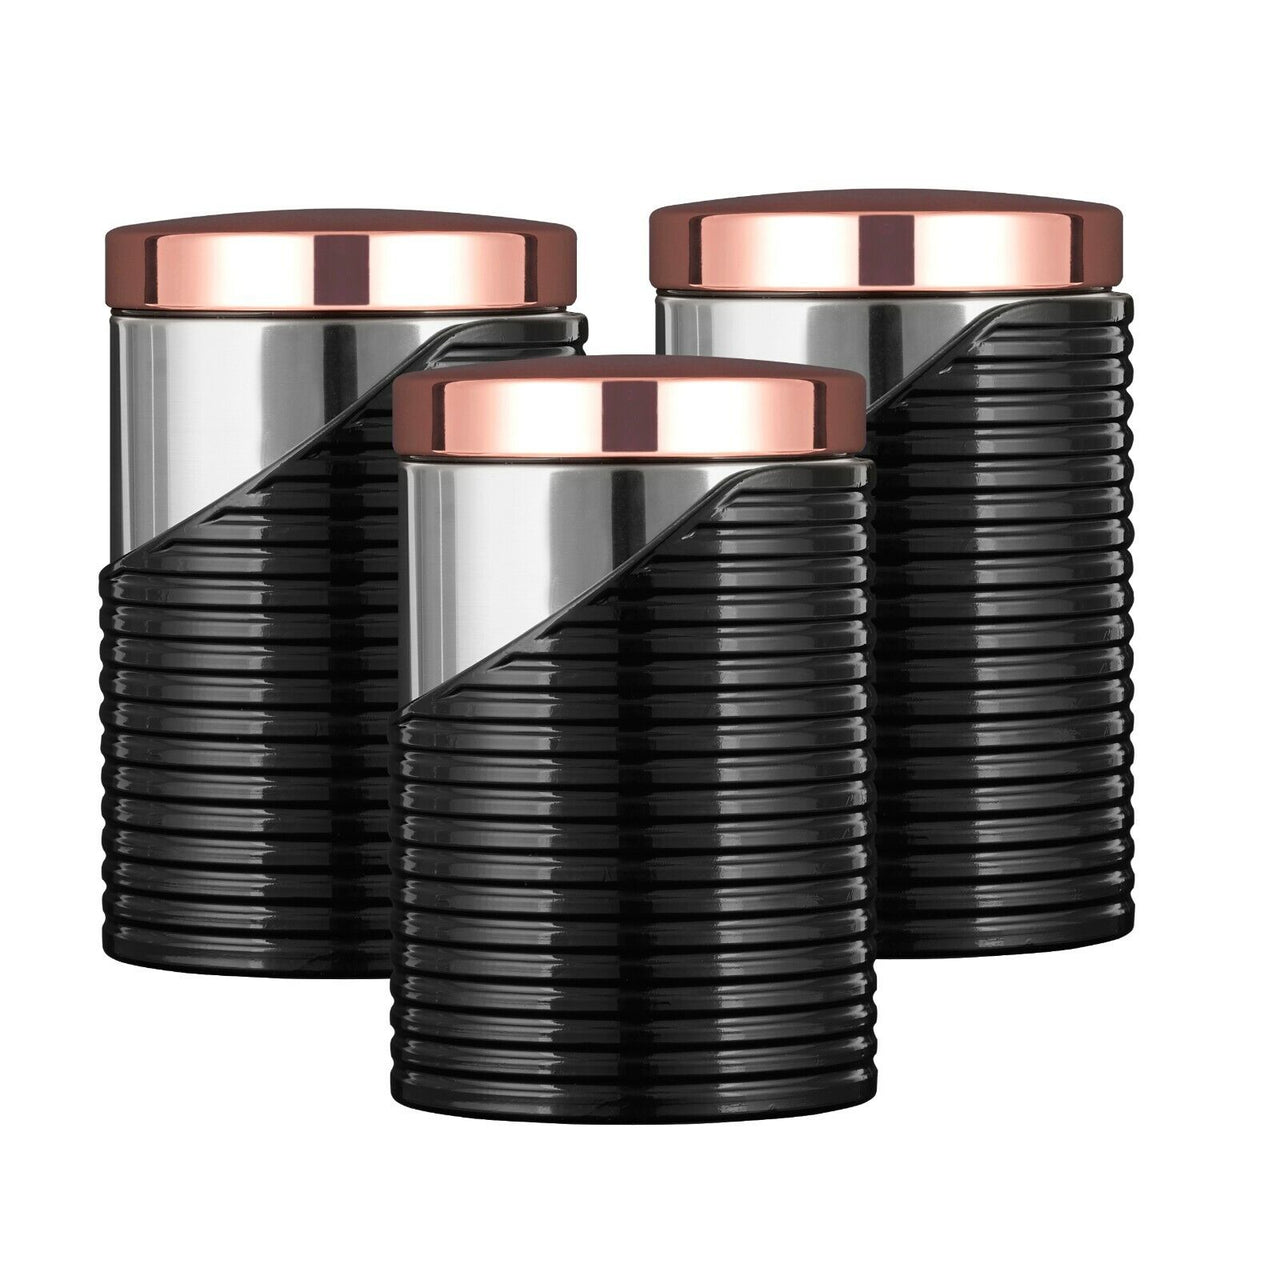 Tower Linear Tea, Coffee & Sugar Set of 3 Storage Canisters in Rose Gold & Black